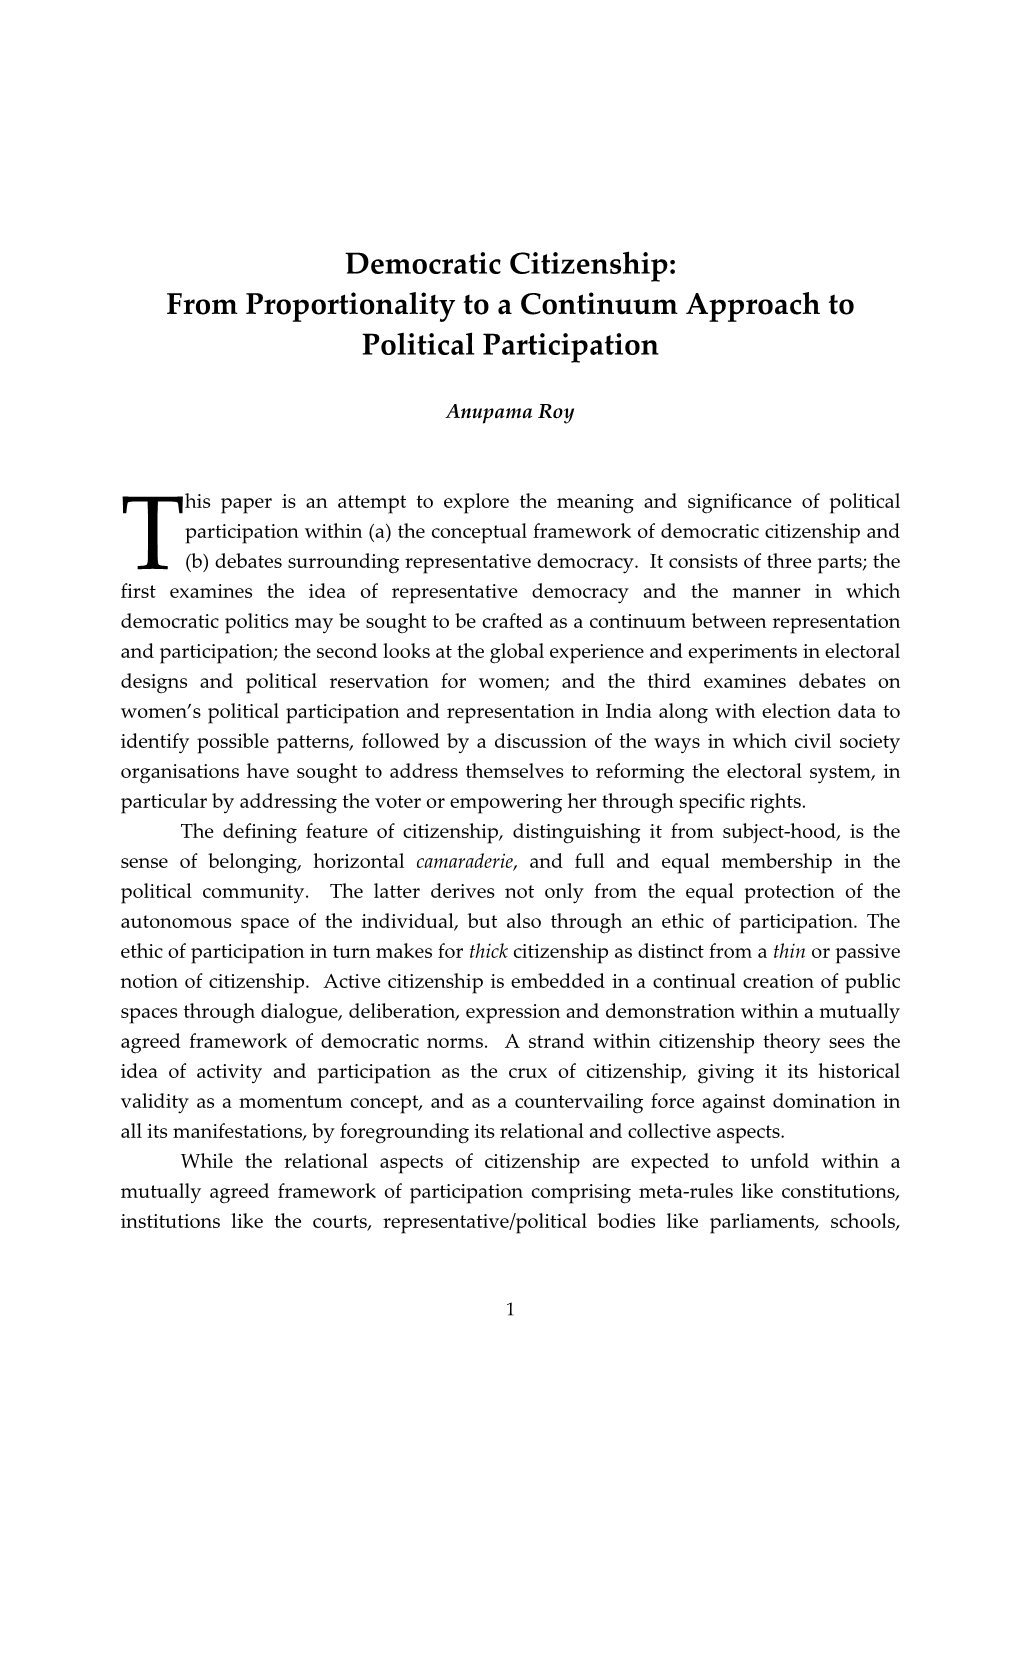 Democratic Citizenship: from Proportionality to a Continuum Approach to Political Participation